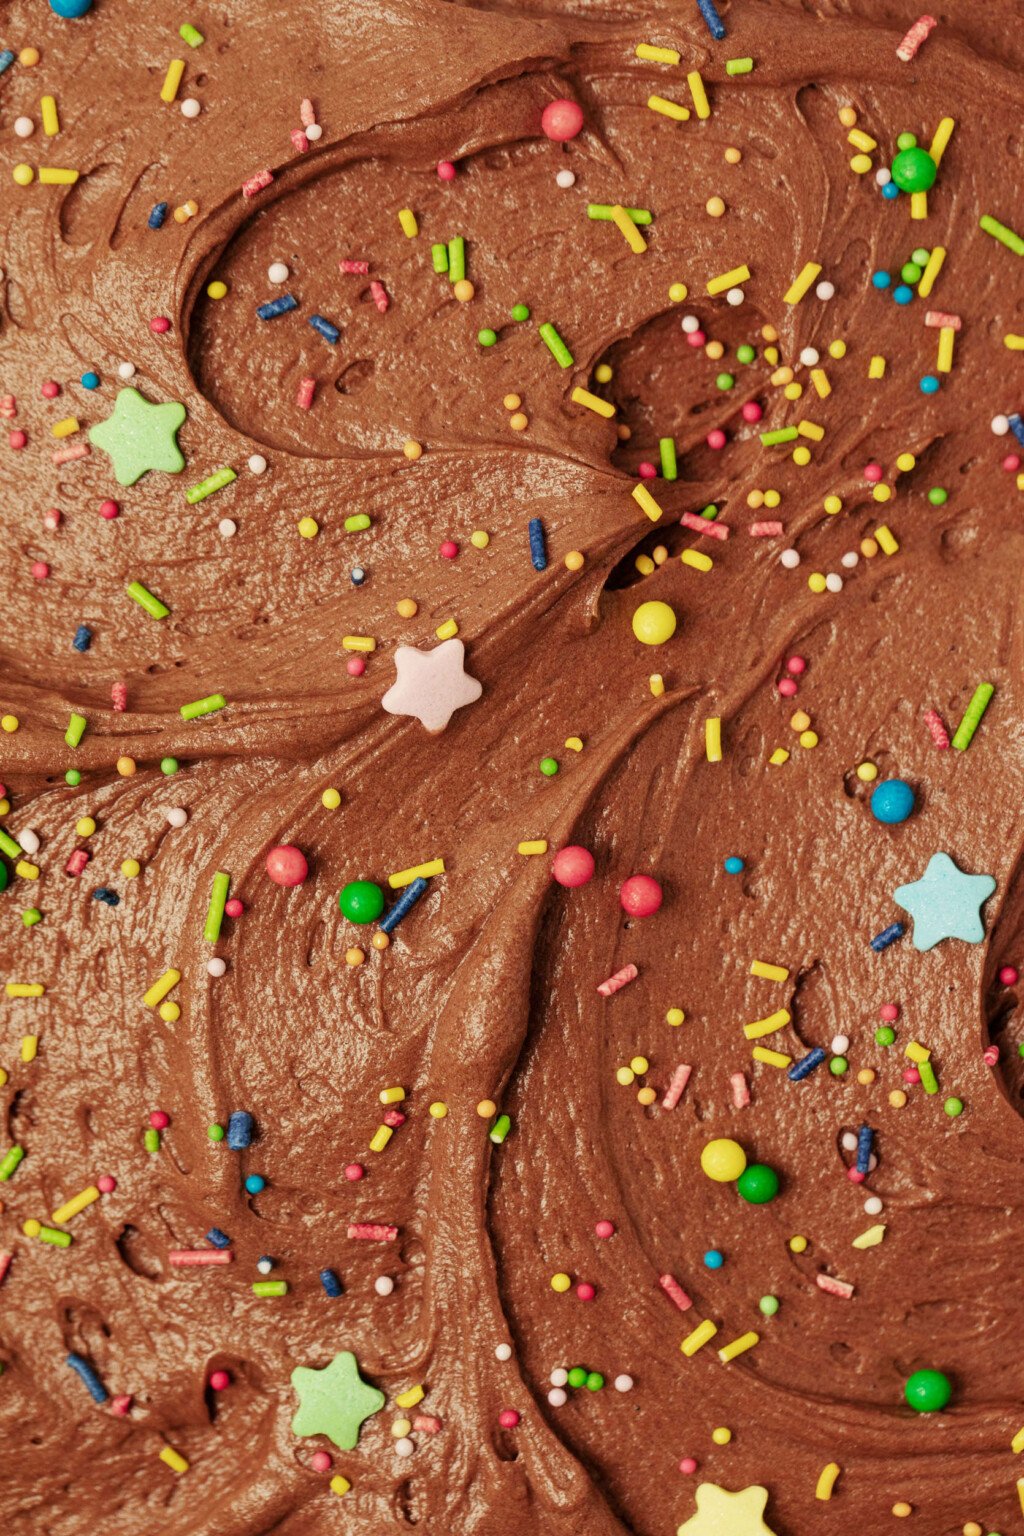 A close-up image of swirls of chocolate buttercream and sprinkles, which have been used to frost a cake.